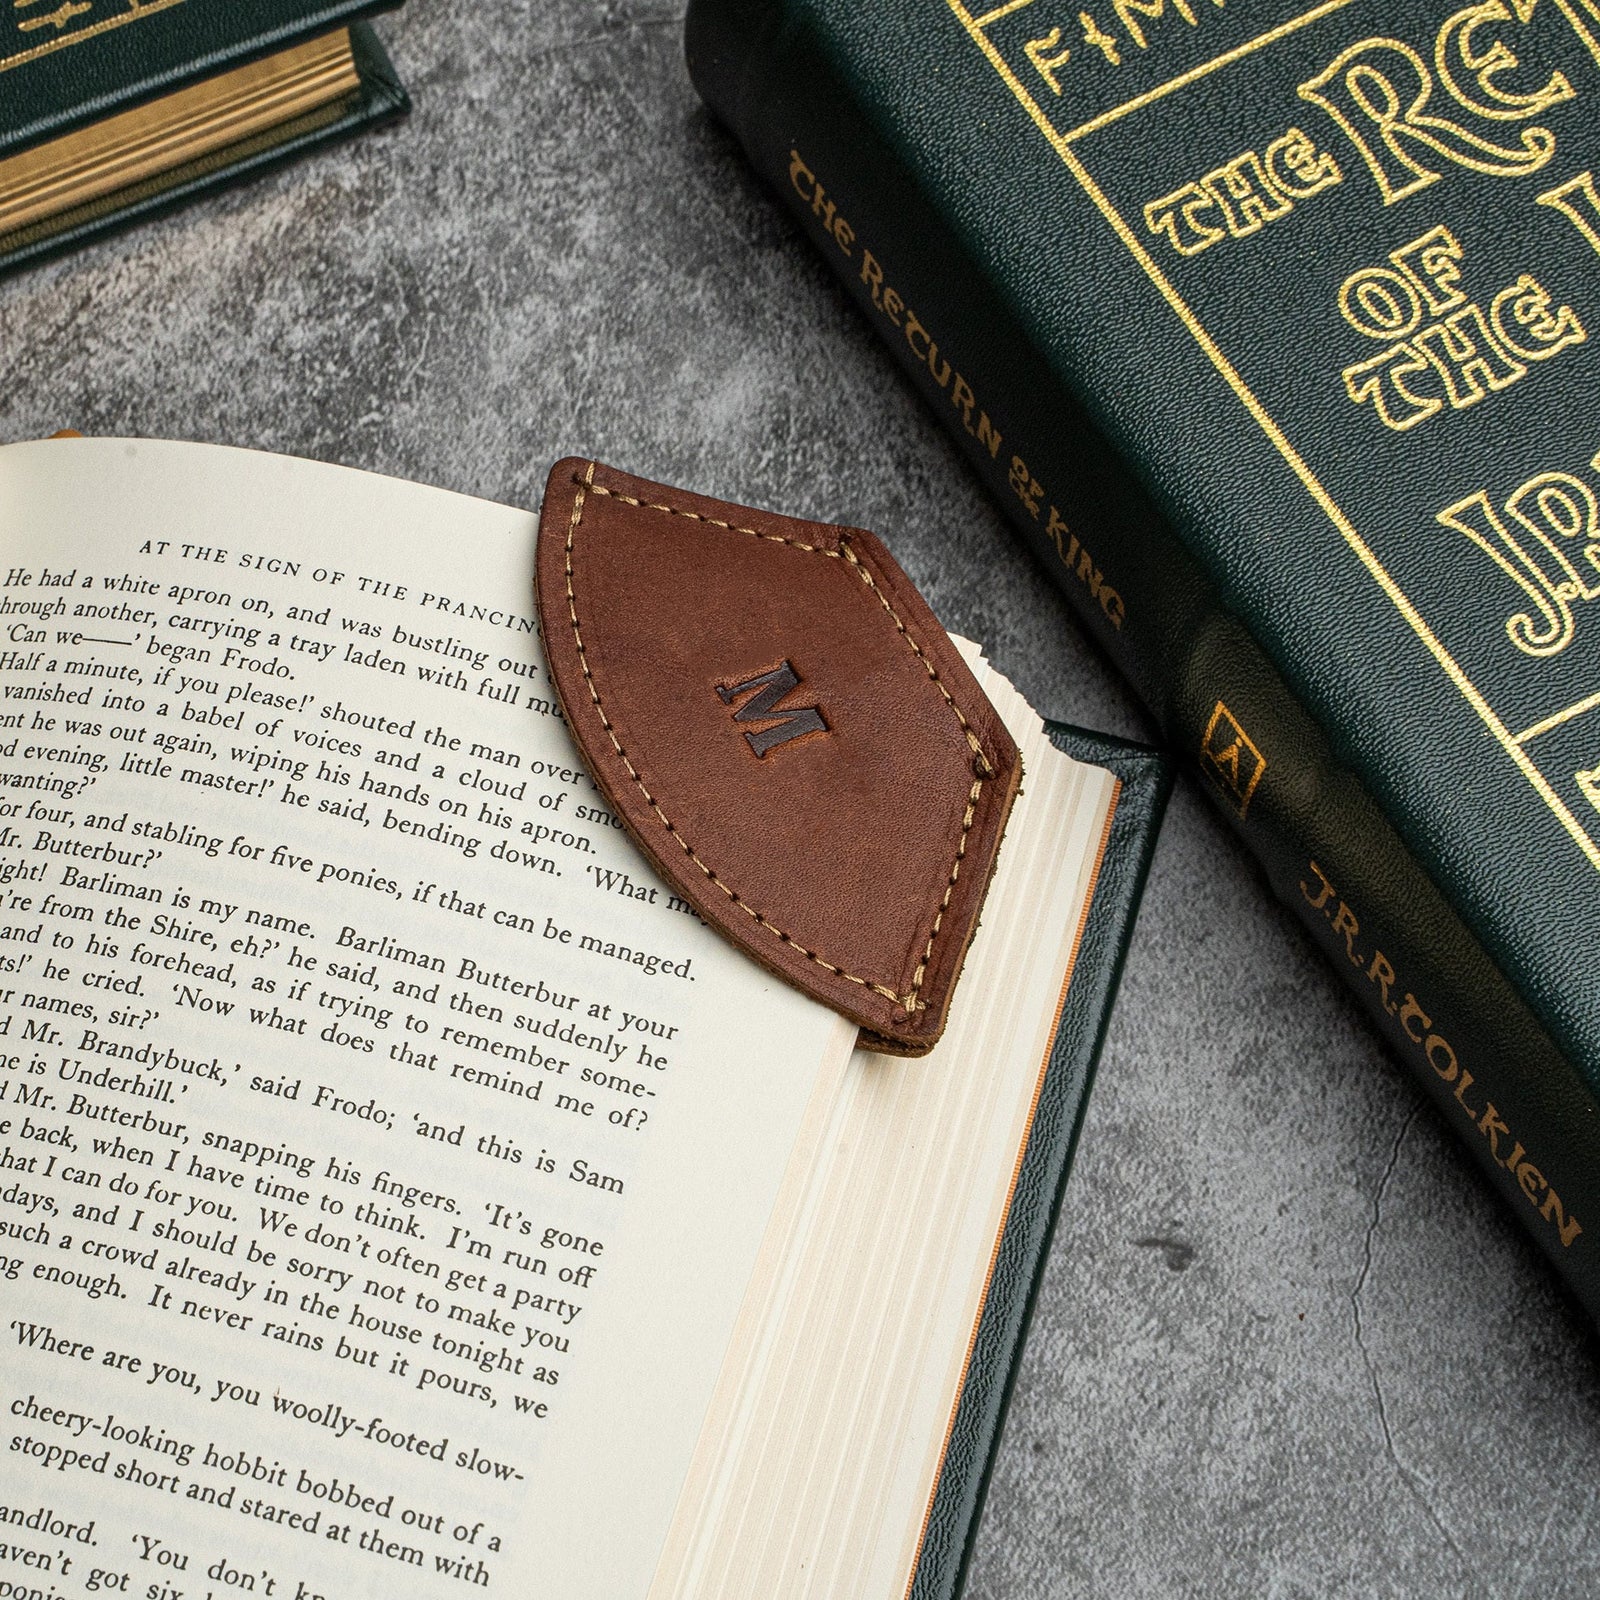 The Tucker Fine Leather Key Chain Key ring